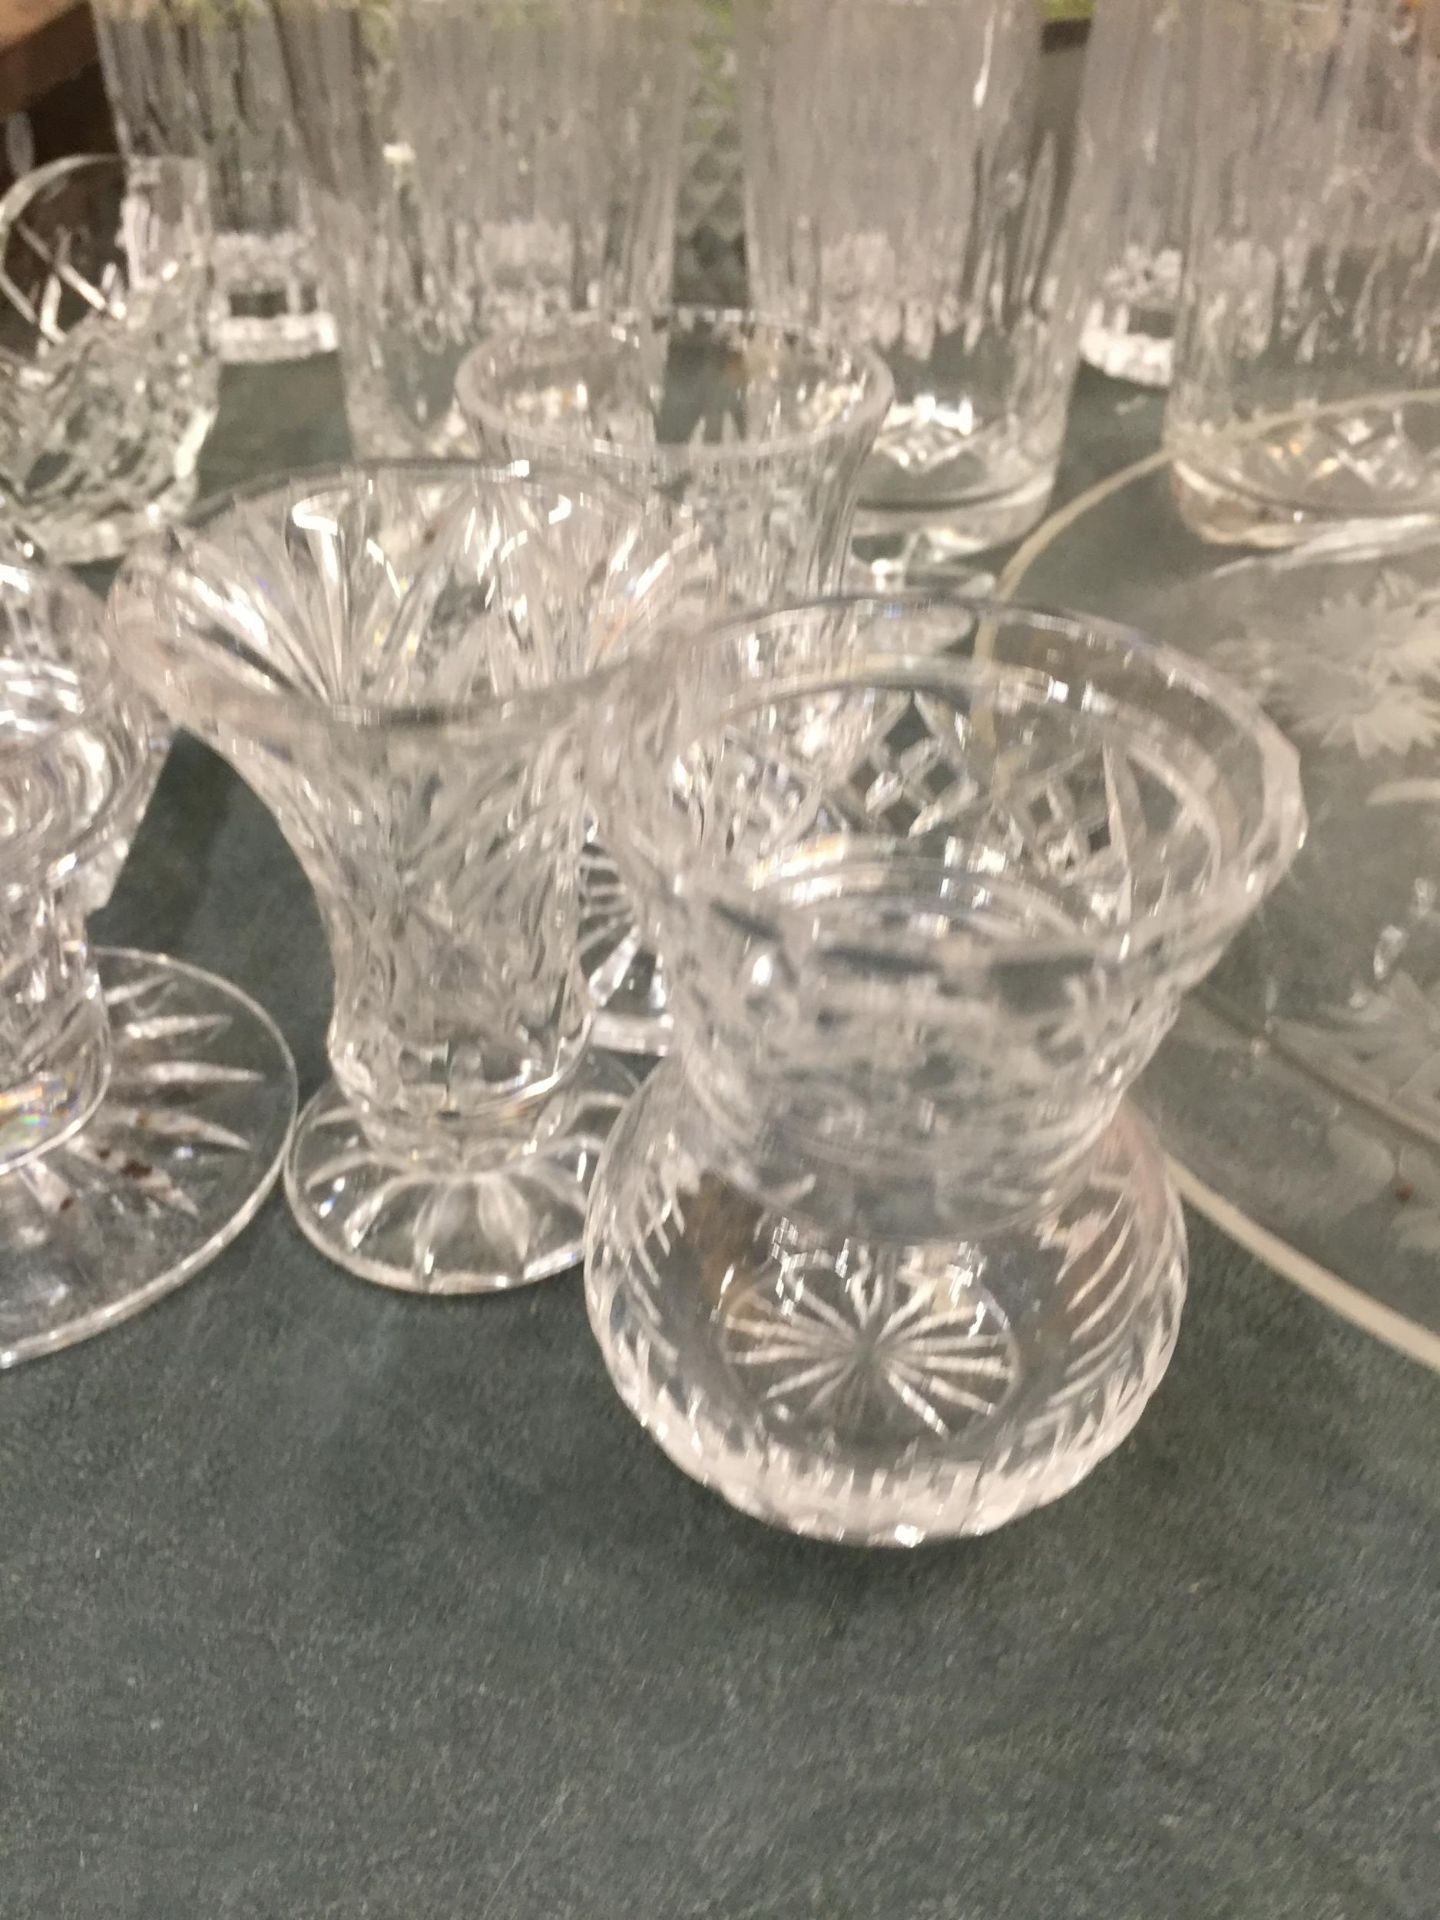 A COLLECTION OF CUT GLASS ITEMS, WHISKY TUMBLERS ETC - Image 2 of 5